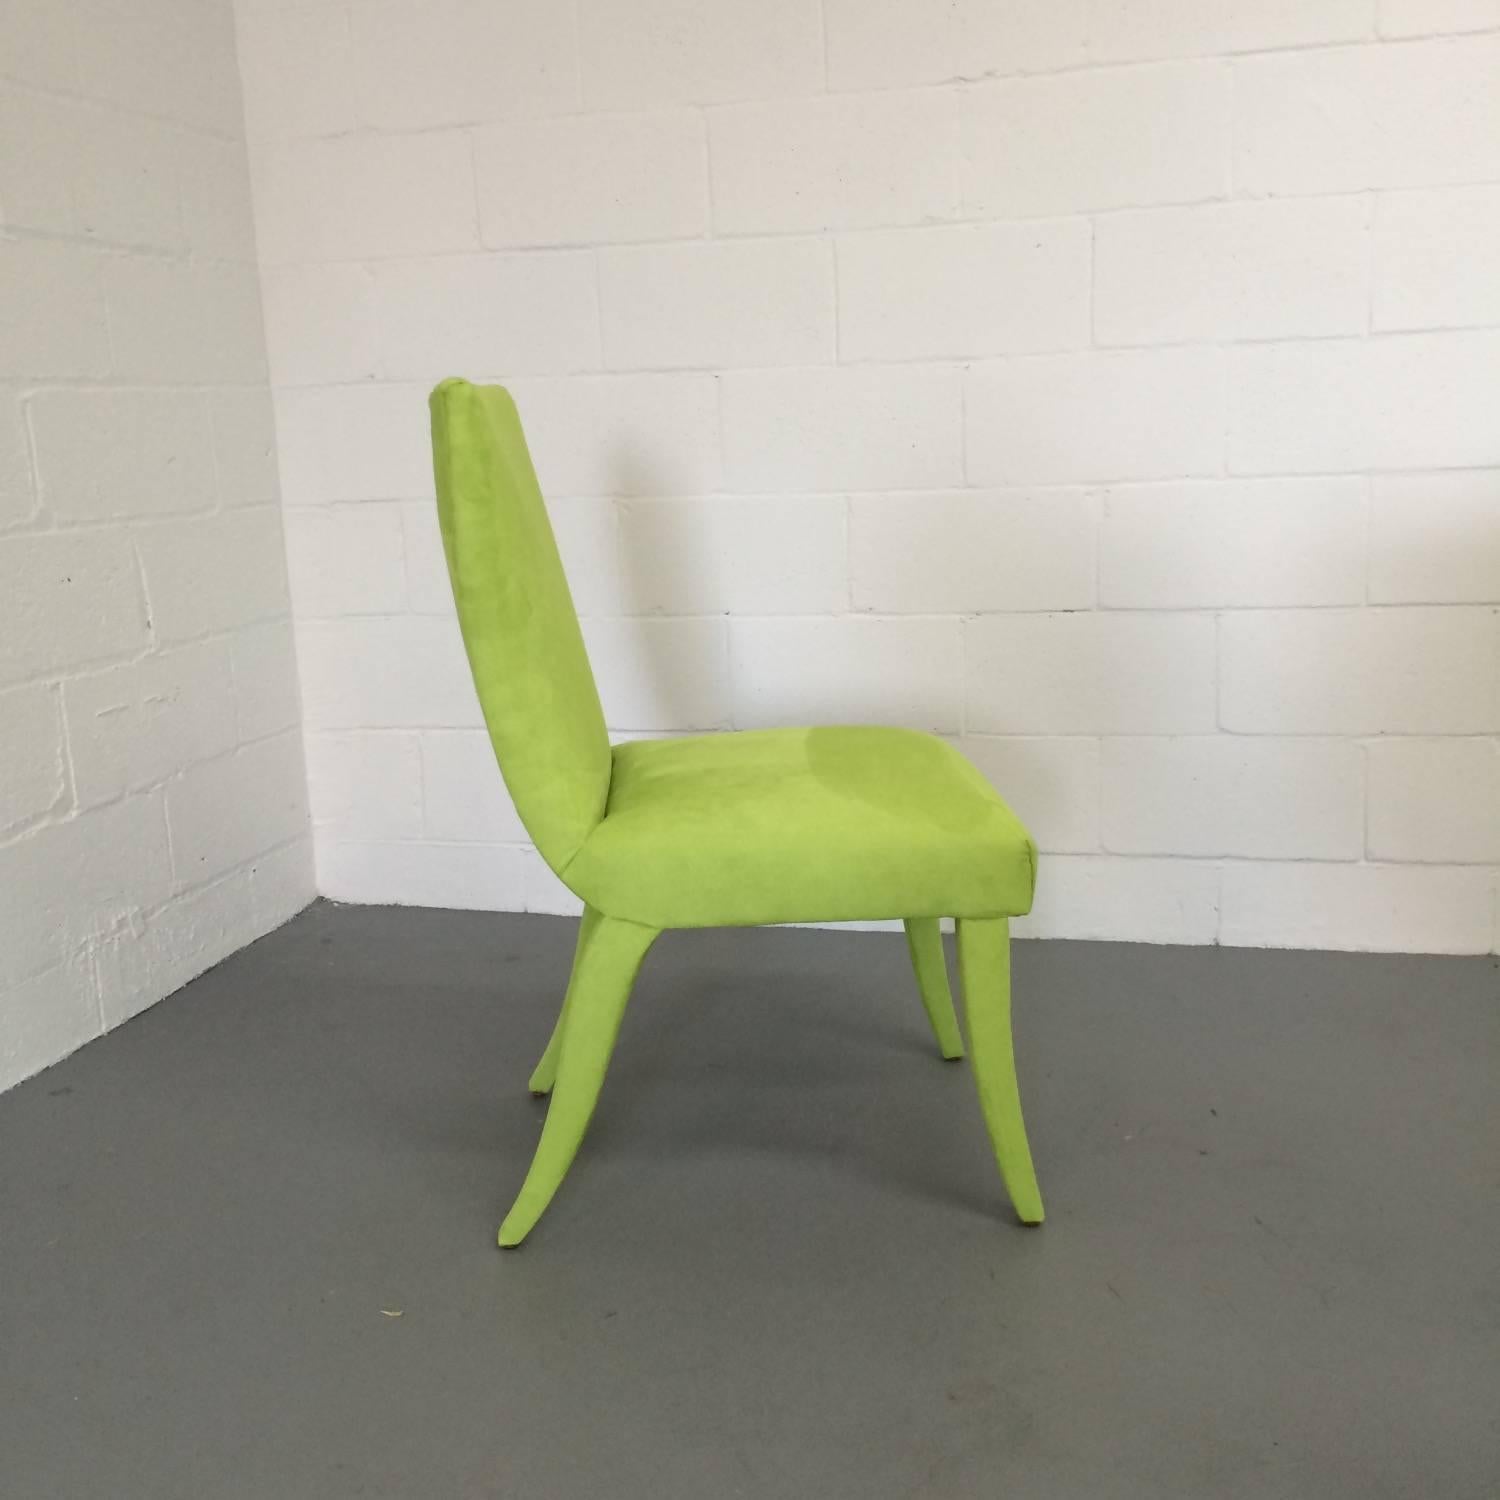 Make a statement with these amazing dining chairs upholstered in a vibrant lime green ultra suede, which is renowned for its stain resistance. These are fantastic, comfortable and very unique dining chairs with little retro twist!